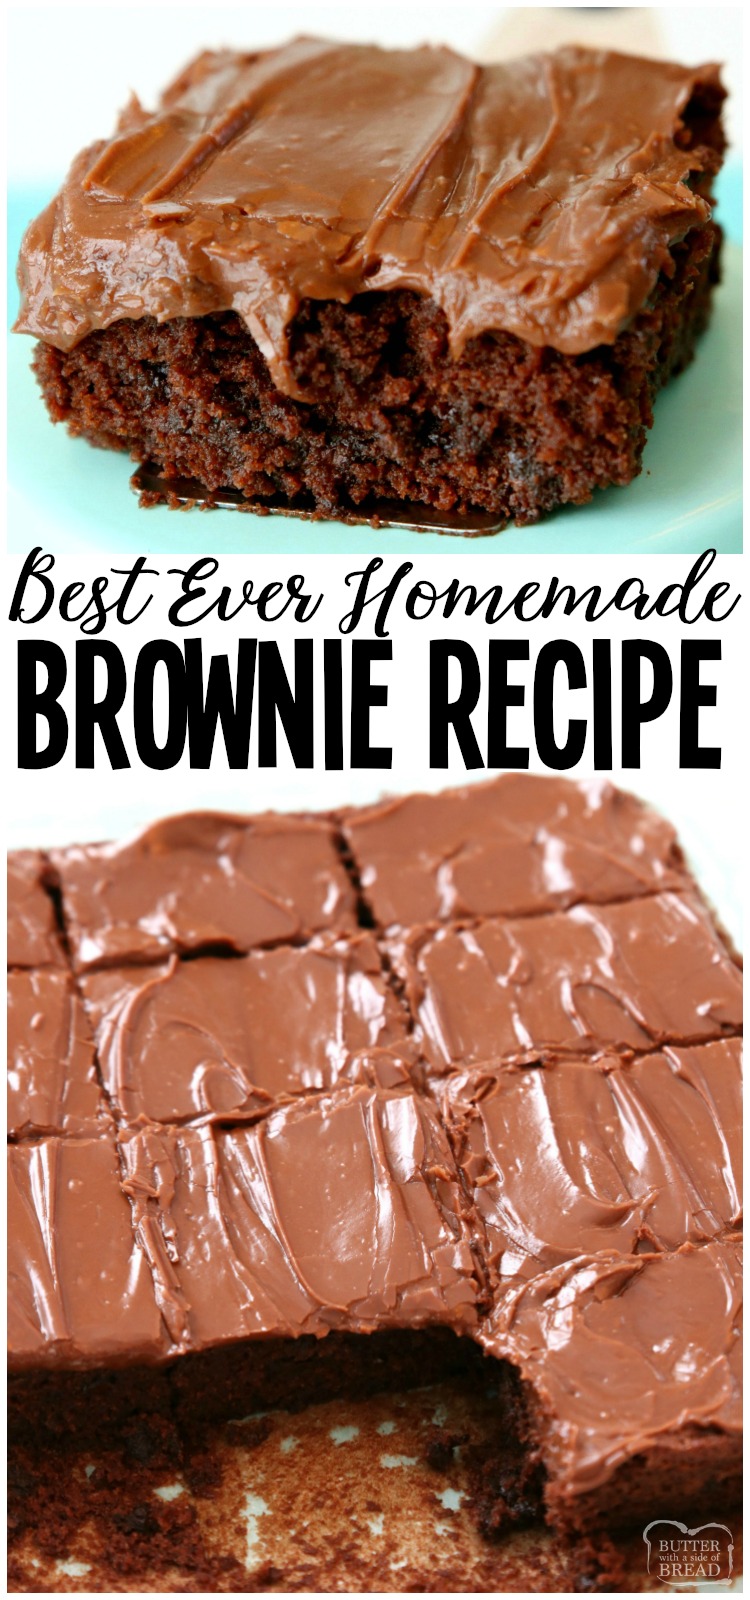 Best Classic Brownie Recipe made with basic ingredients and baked to fudgy, chocolate perfection! The easy chocolate frosting is amazing. These really are the BEST BROWNIES ever! #brownies #chocolate #baking #dessert #brownie #fudge #frosting #recipe from BUTTER WITH A SIDE OF BREAD